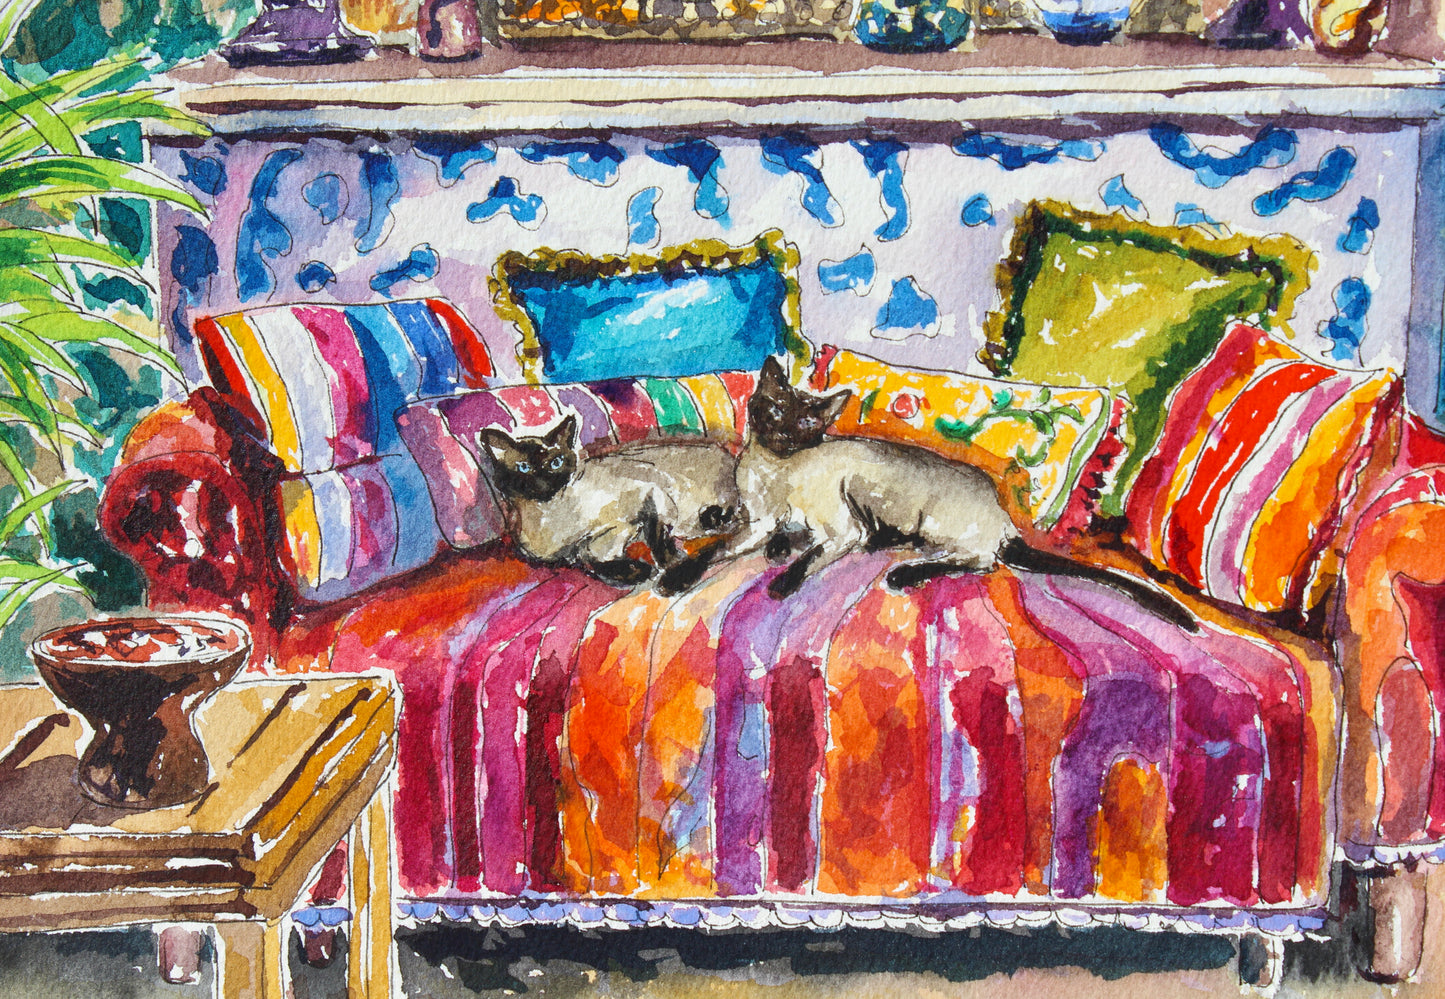 Siamese In Siam, An Original 9" x 12" Watercolor And Ink Painting Of 2 Siamese Cats In An Interior Scene